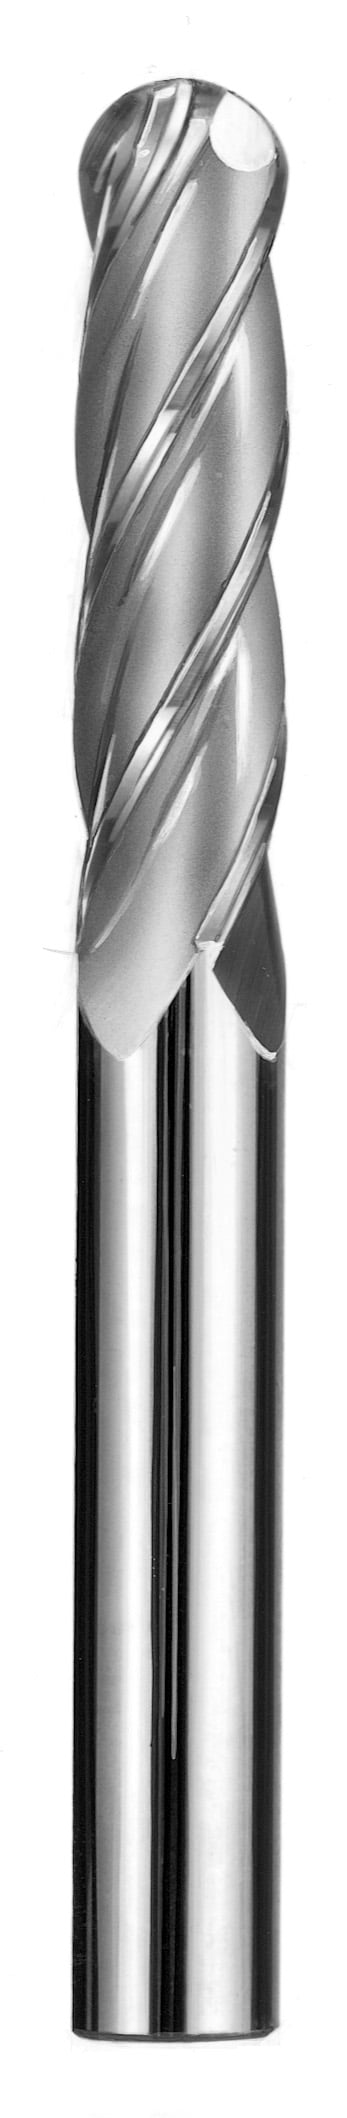 1/4" Dia, 4 Flute, Ball Nose End Mill - 33104